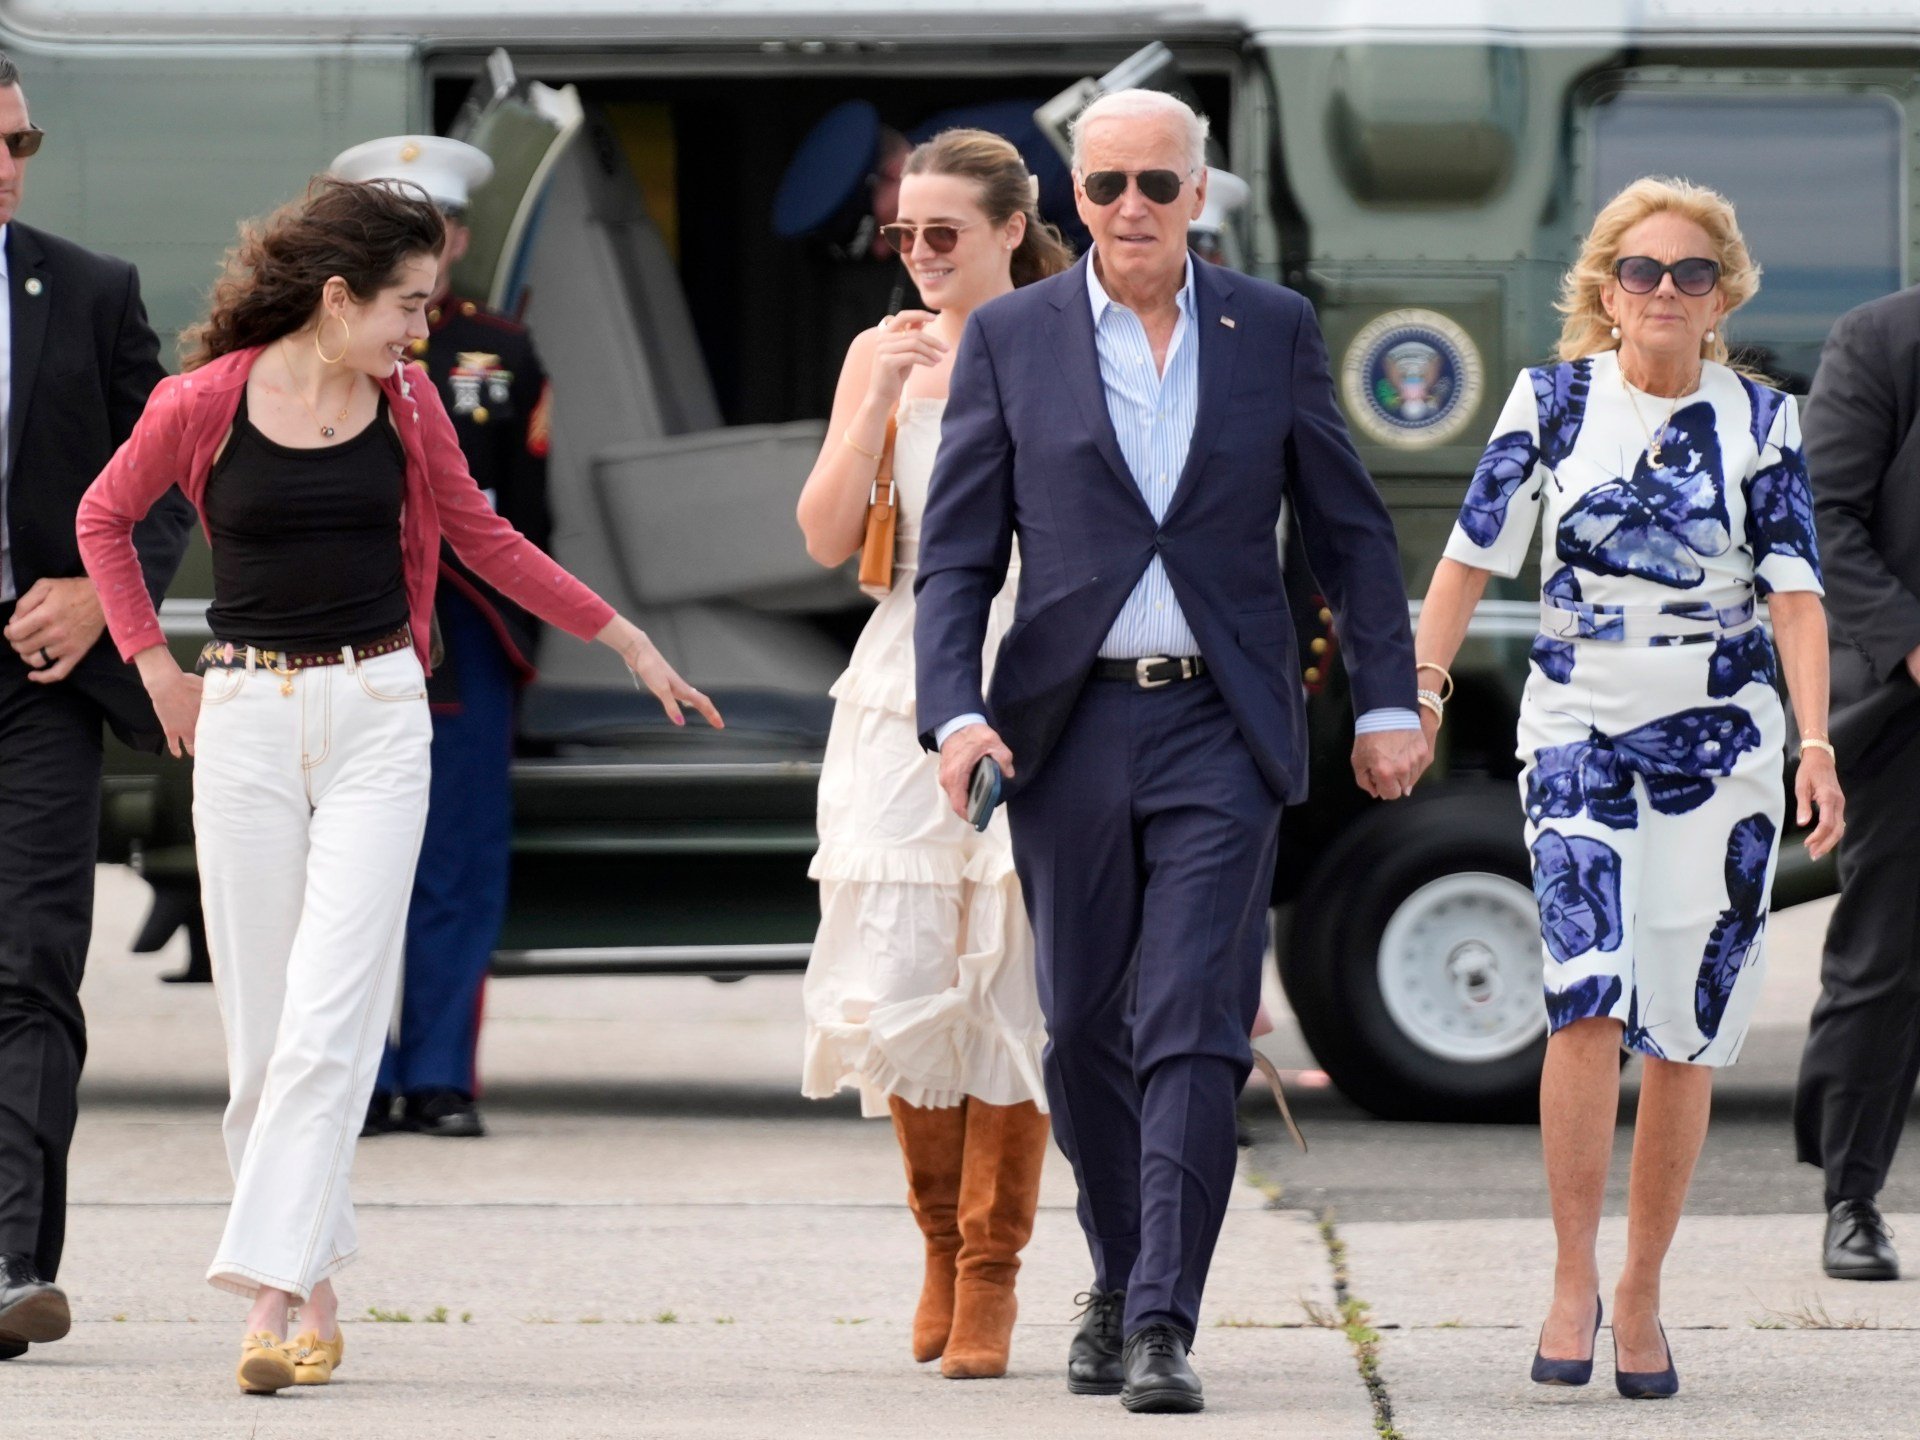 Biden’s family tells him to stay in US presidential race